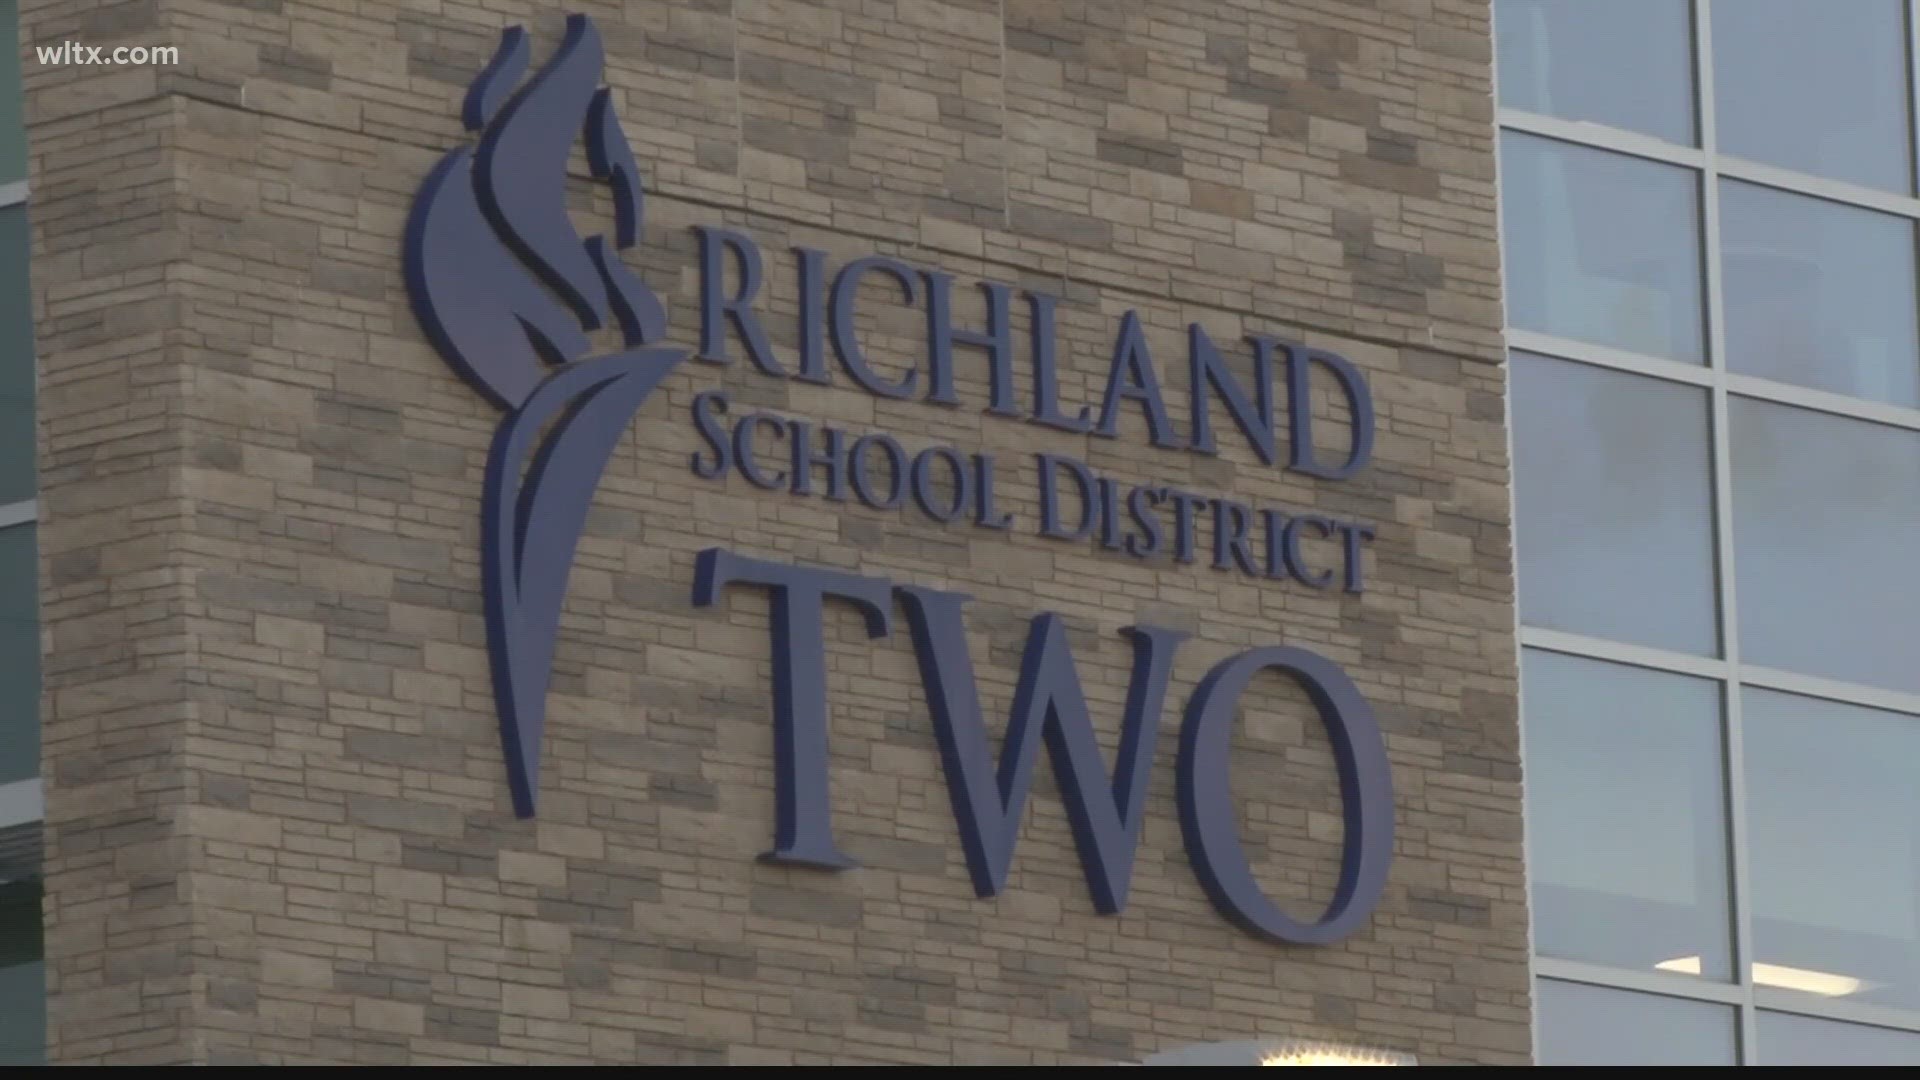 With about 300 vacancies across the district, Richland Two is speeding up its hiring process through an amendment to a hiring policy already in place.